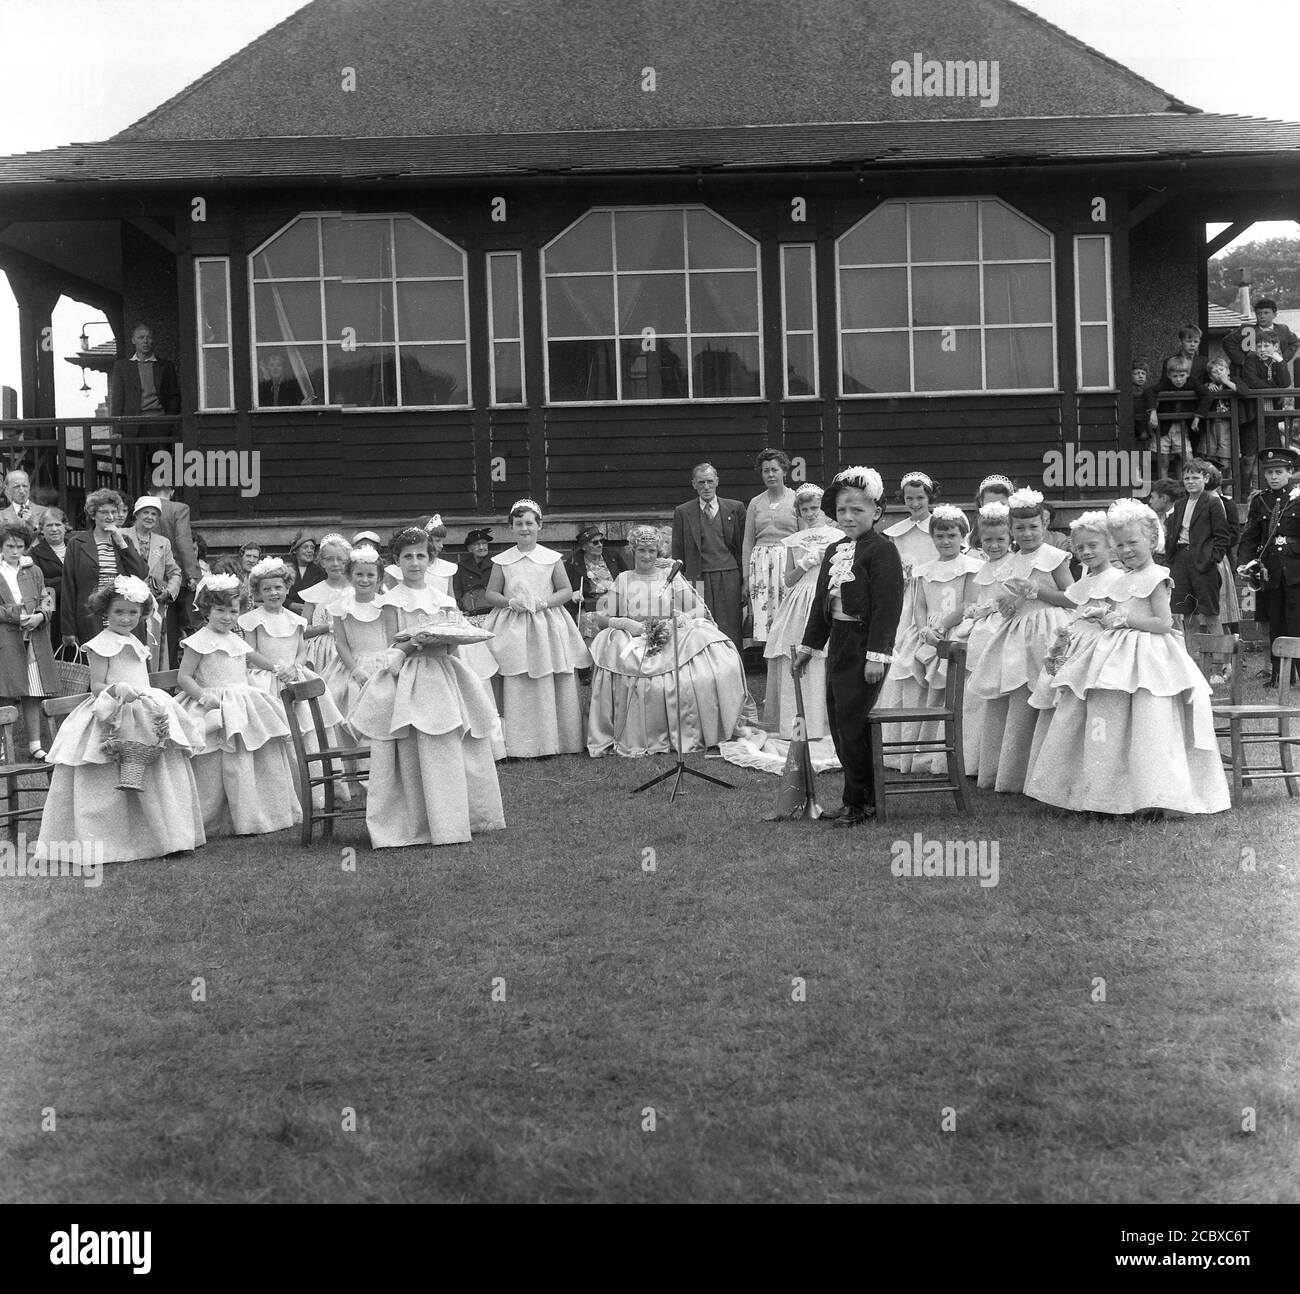 1950s, historical, the newly crowned Rose Queen sitting in her gown with other girls in their costumes and watched by local people in the playing field at Farnworth, Bolton, Lancashire, England, UK. Dating back to the 1880s, the annual Rose Queen festival, held in June, became a major annual event in many towns and villages across the UK, especially in Lancashire, known as the red rose county, following the Wars of the Roses (1455-87). Stock Photo